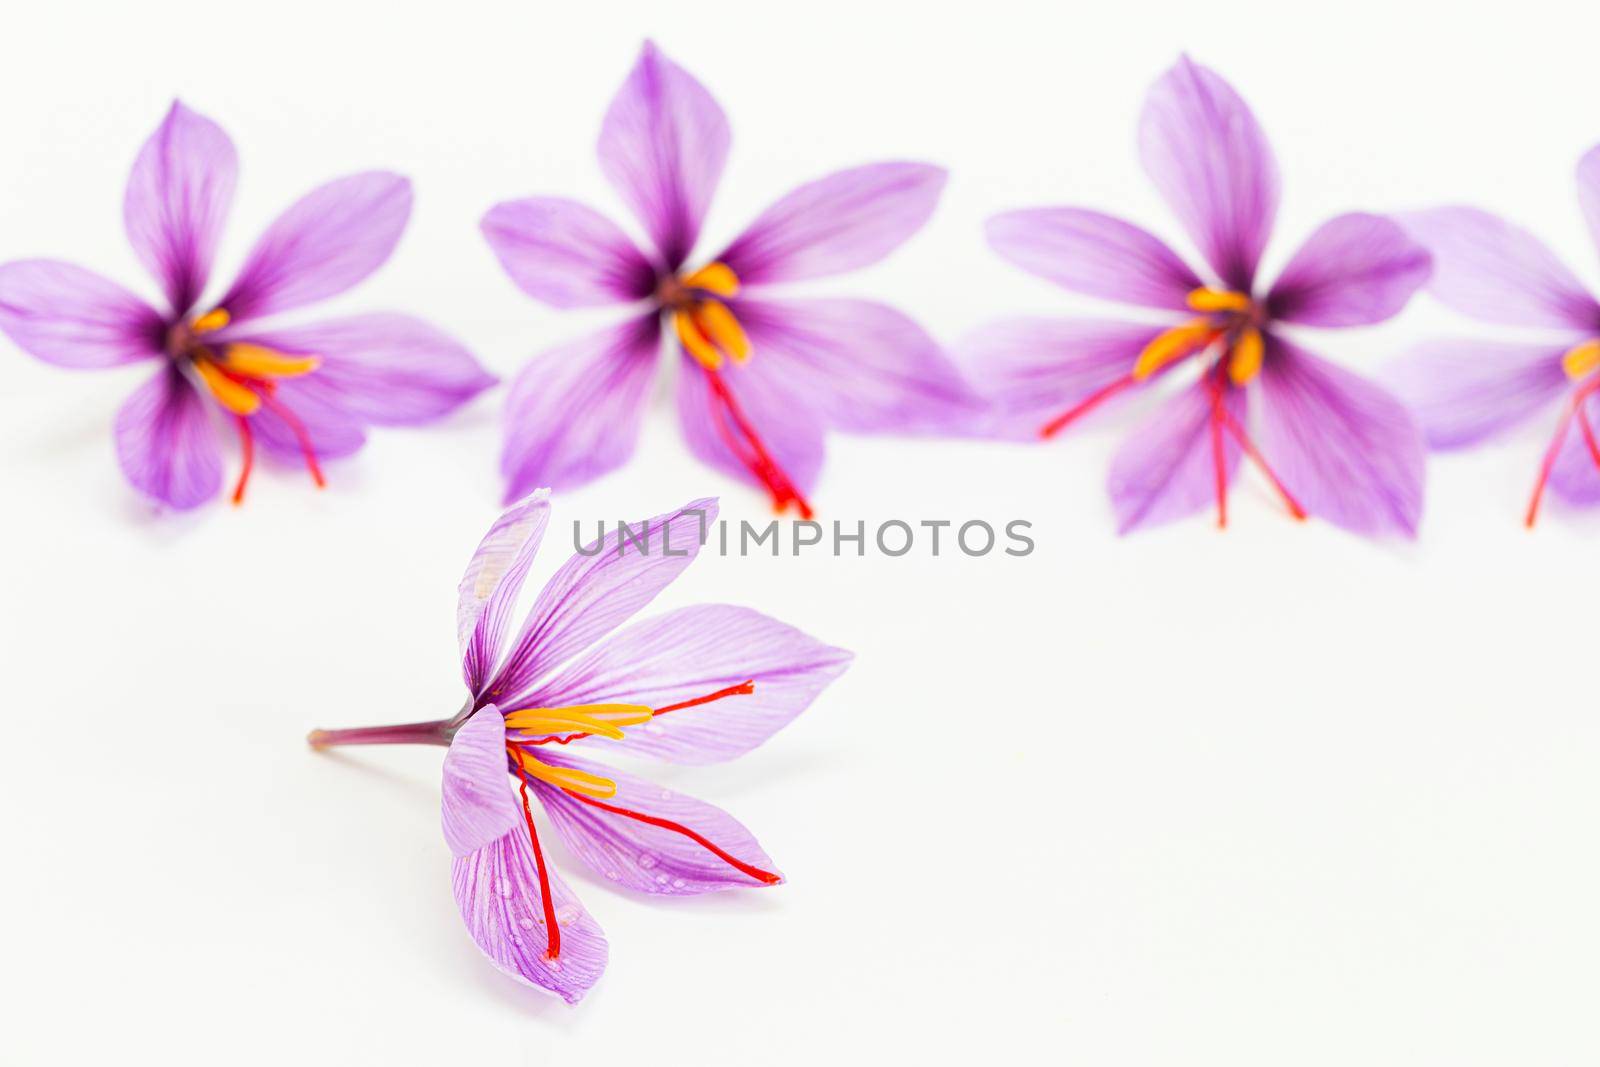 saffron flower bloomed on a white background, the stamens protrude from the crocus